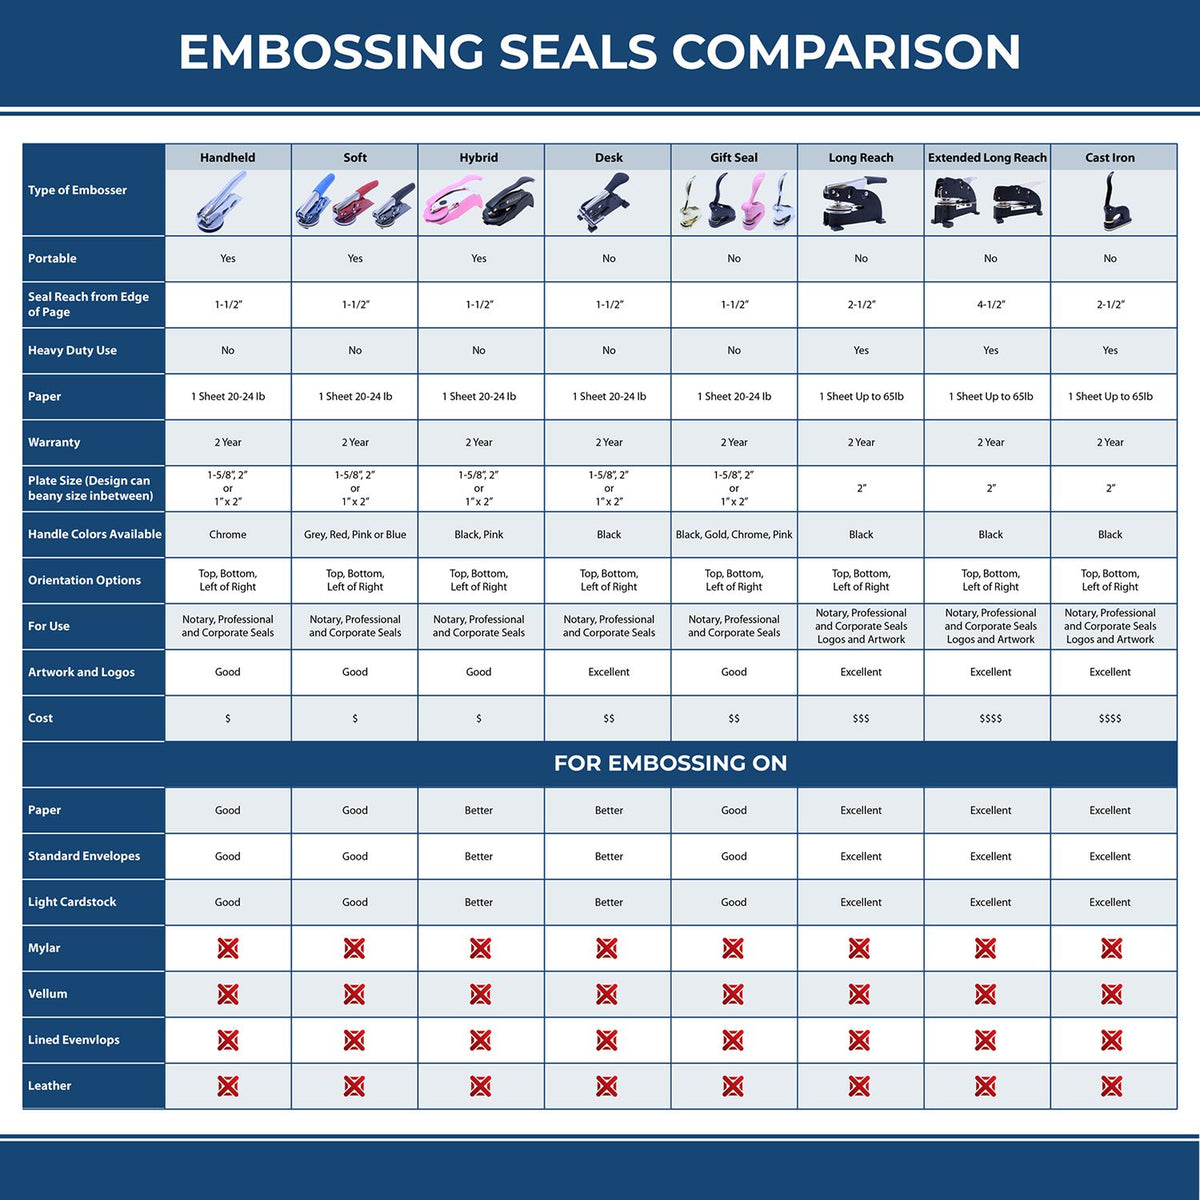 A comparison chart for the different types of mount models available for the Handheld Missouri Architect Seal Embosser.